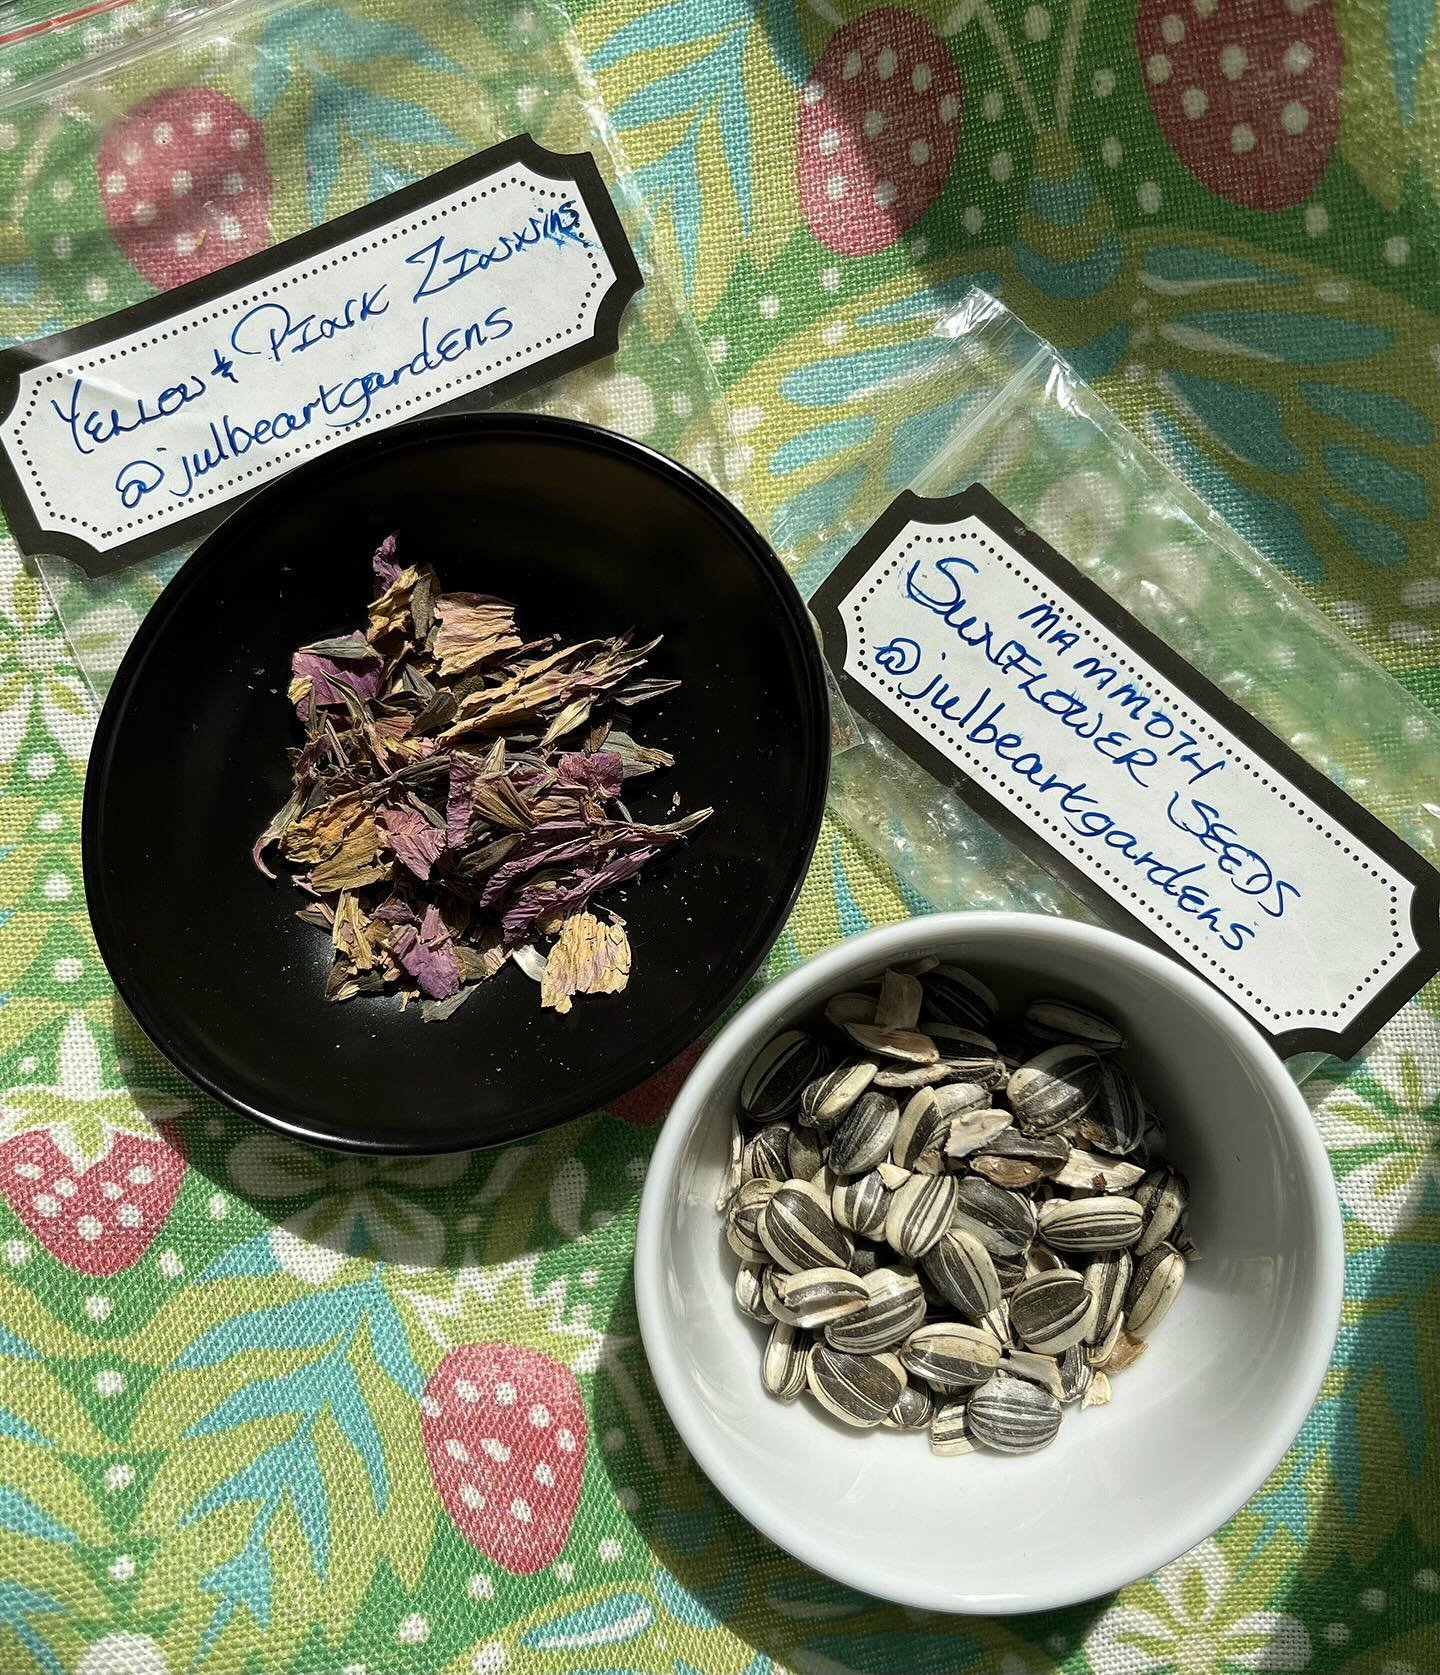 In January when the skies were leaden and the ground was hard, I received the most wonderful envelope in the mail. Julia Benn, of @julberartinteriors and @julbeartgardens, had sent me zinnia and sunflower seeds! And these were not just any seeds- the